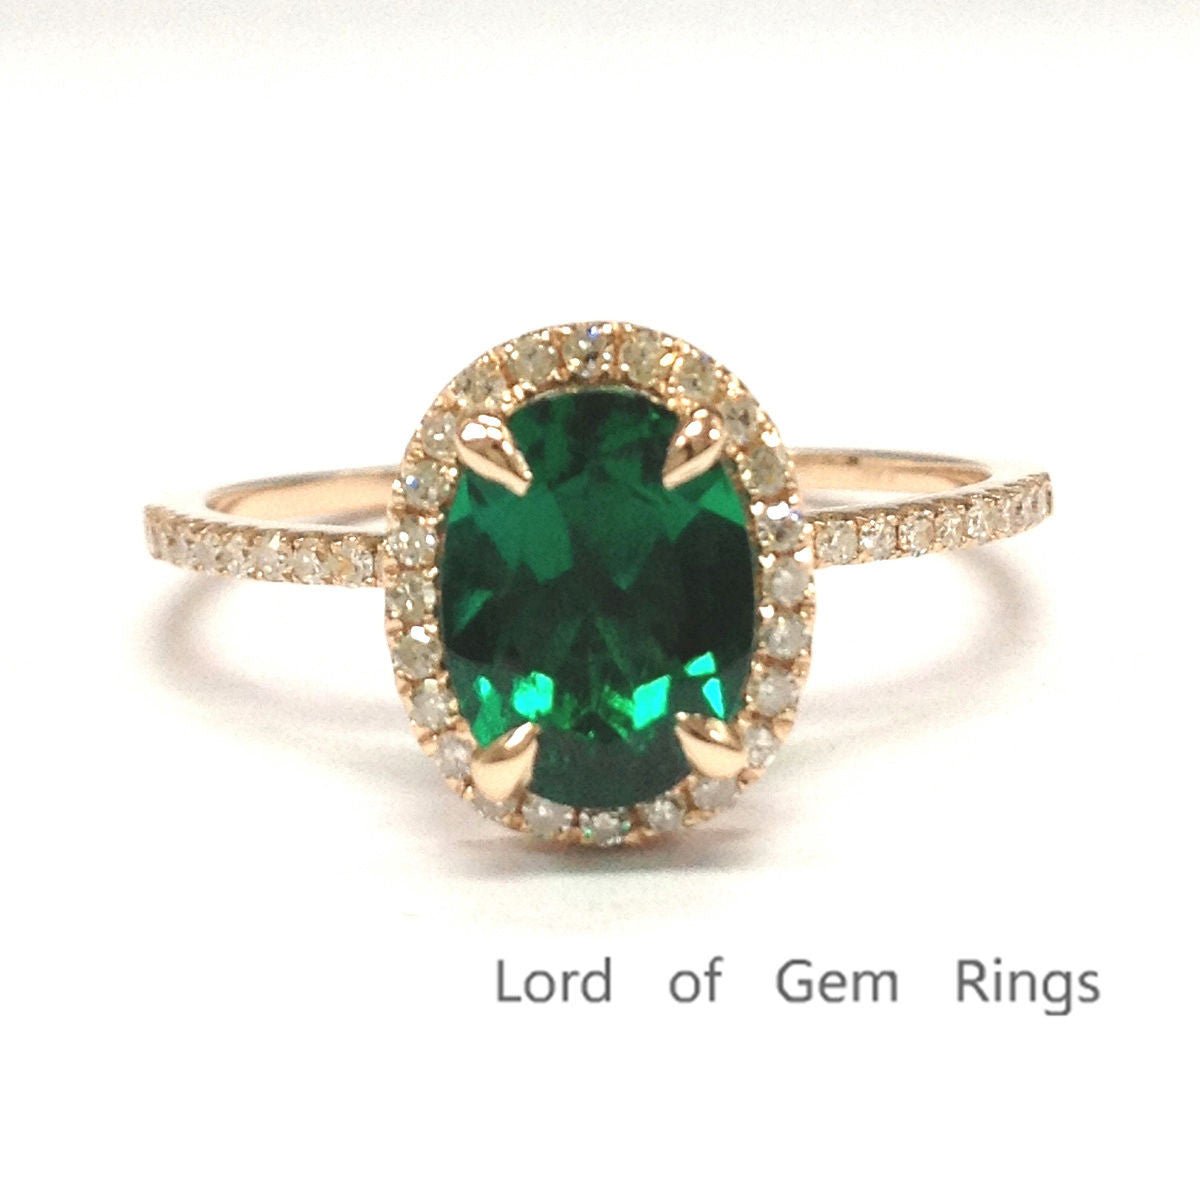 Oval Emerald Diamond Halo Engagement Ring - Lord of Gem Rings